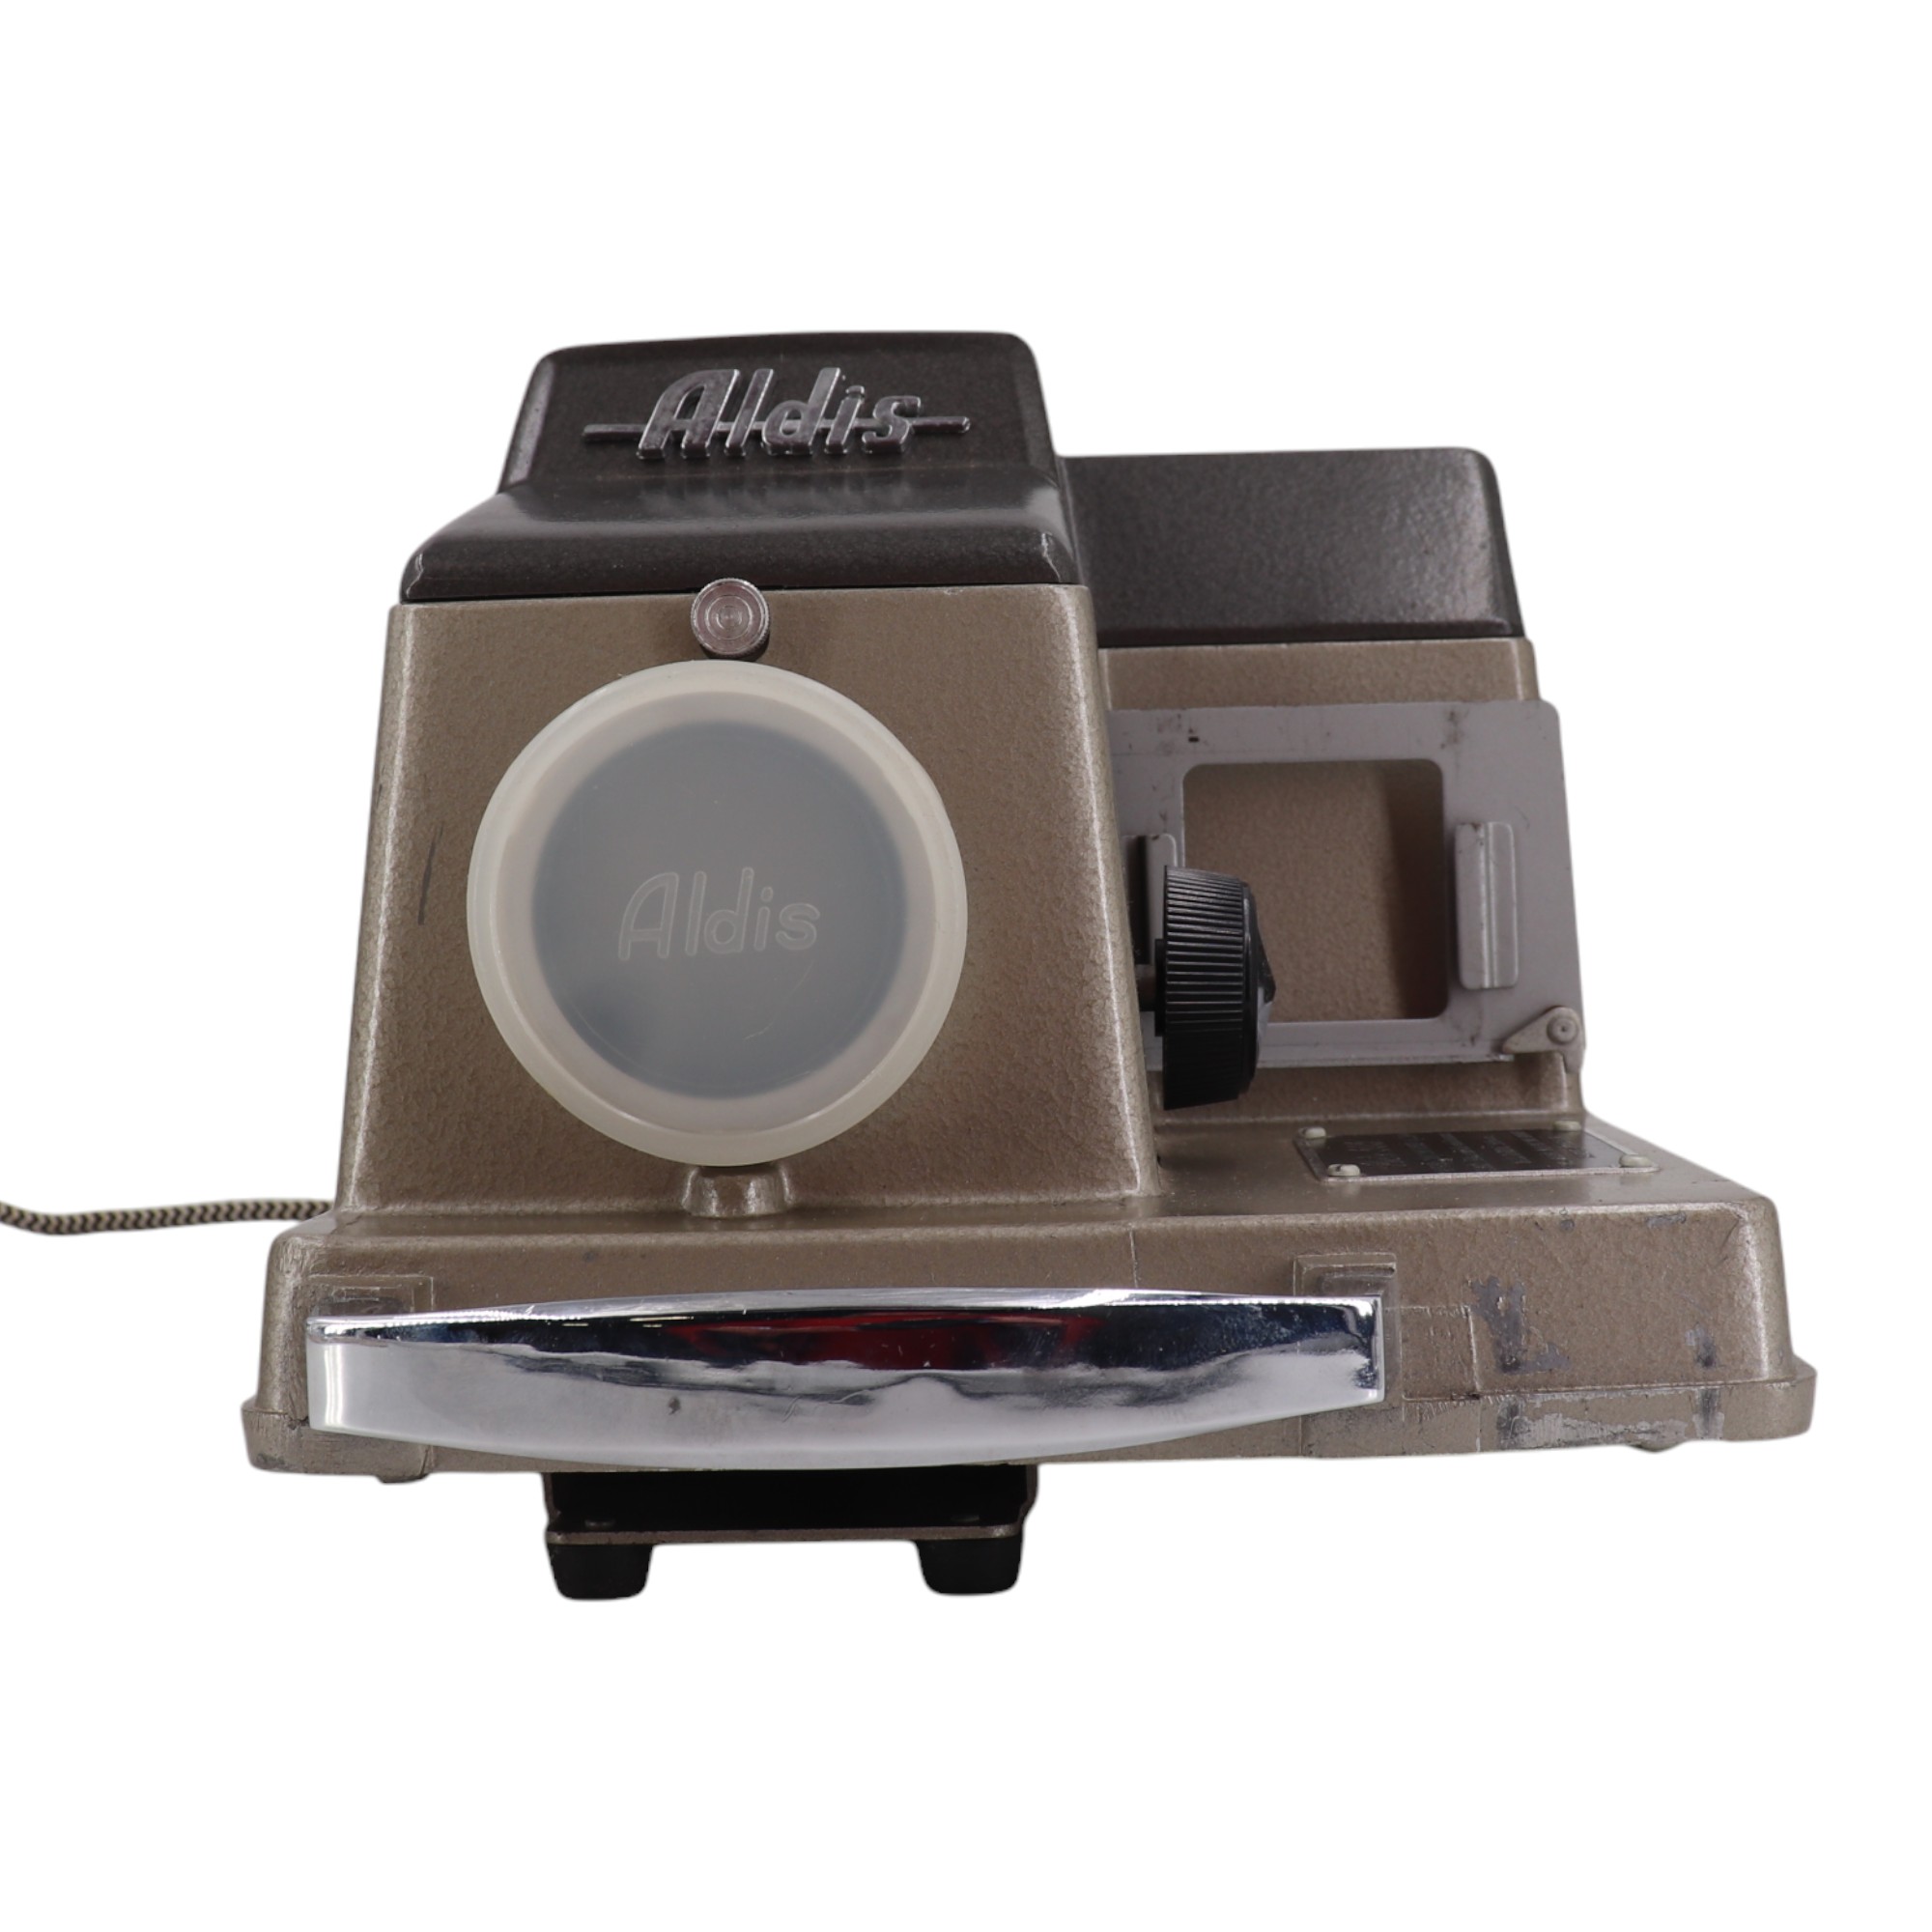 Two vintage slide projectors comprising a Hi-Lyte 250 and an Aldis 505 together with a lamp and a - Image 4 of 8